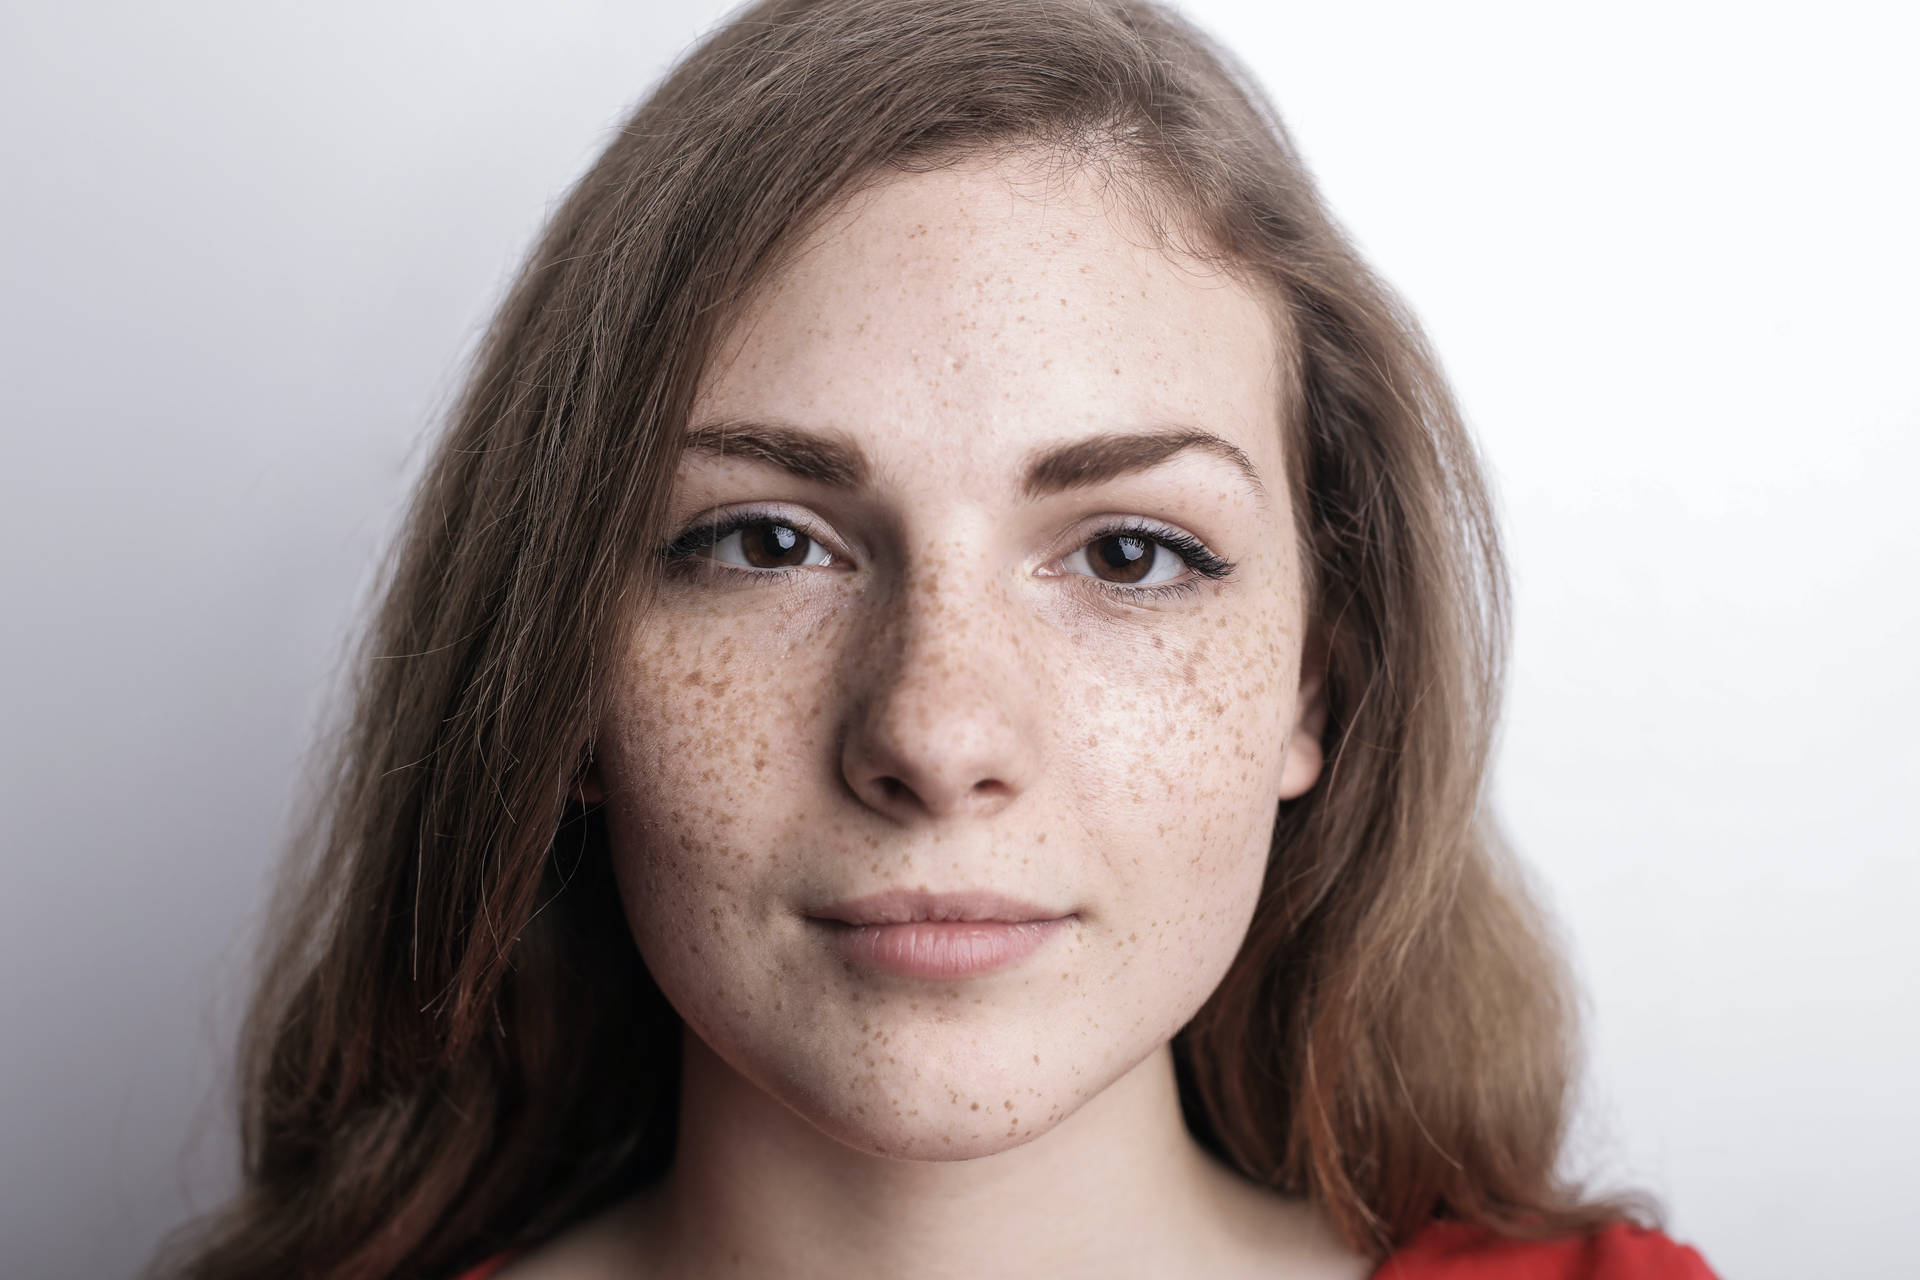 Headshot Of A Girl With Freckles On Face Wallpaper